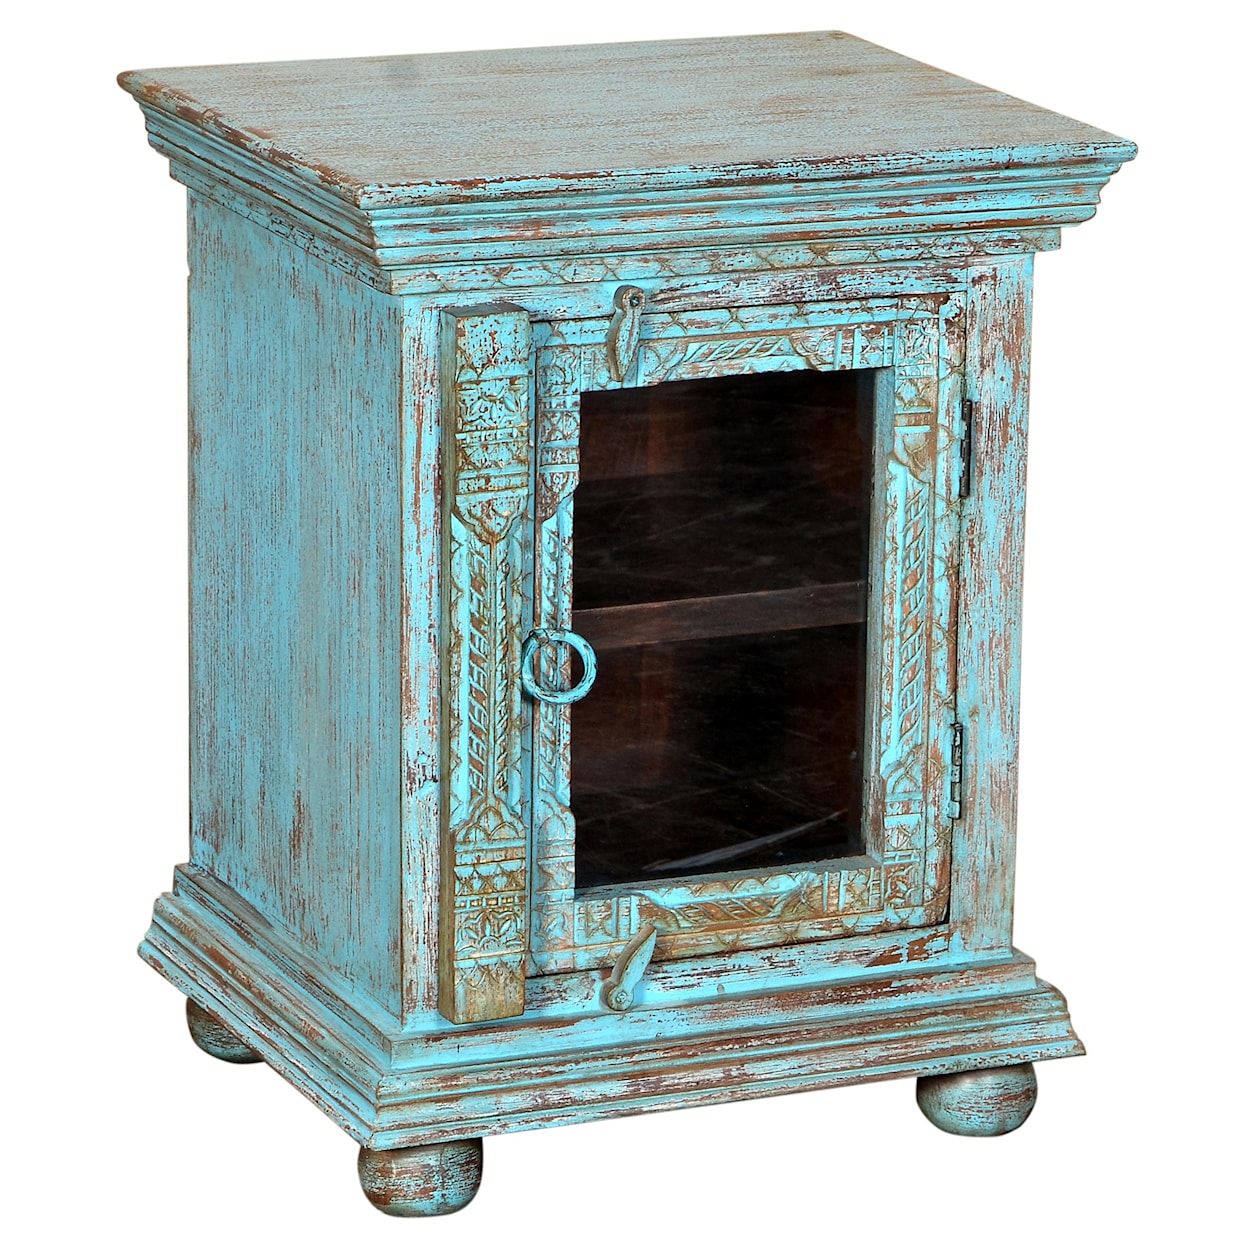 Home Trends & Design FJP Indian Cabinet Turquoise